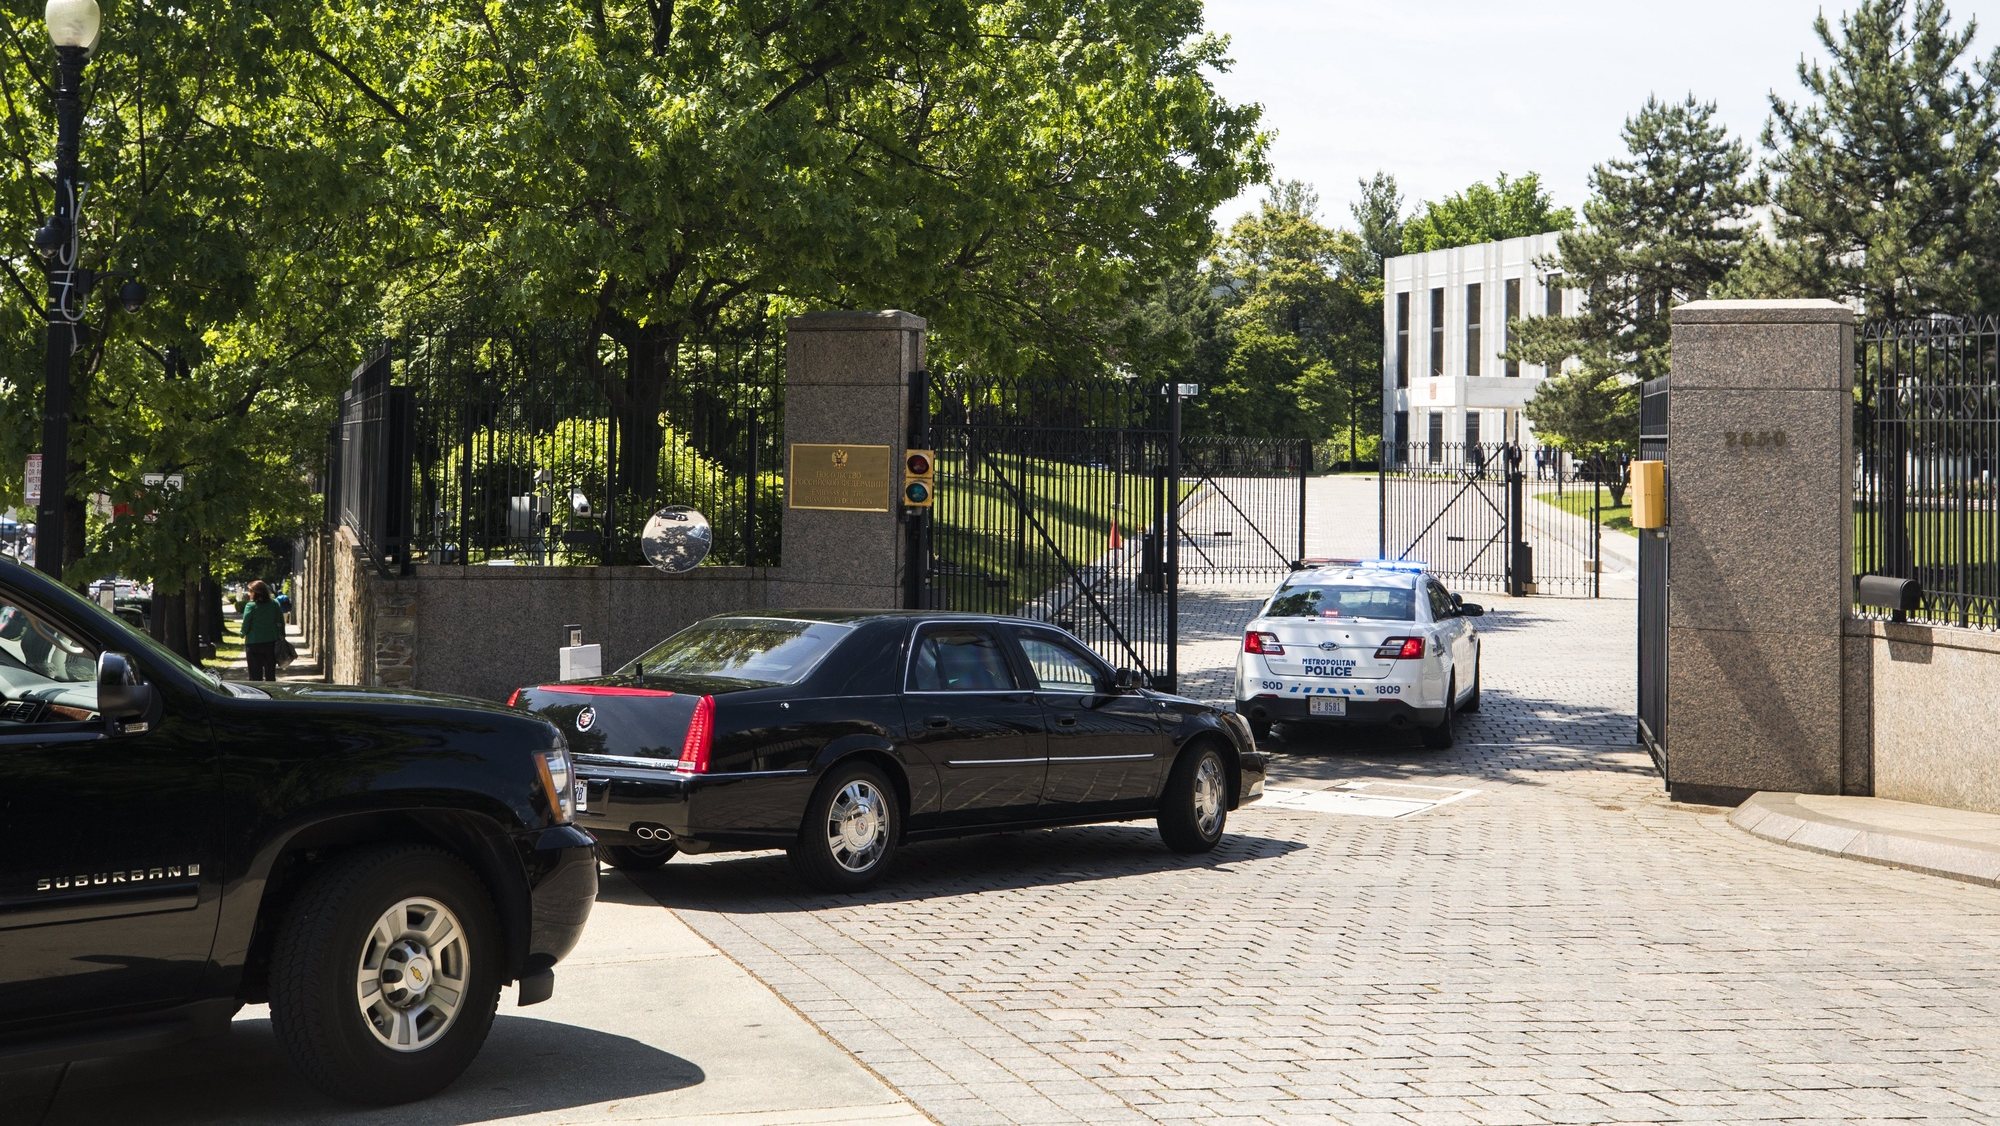 epa05955048 The vehicle carrying Russian Foreign Minister Sergey Lavrov (C) arrives at the Russian Consulate in Washington, DC, USA, 10 May 2017. Lavrov met with US President Donald J. Trump at the White House earlier in the day.  EPA/JIM LO SCALZO